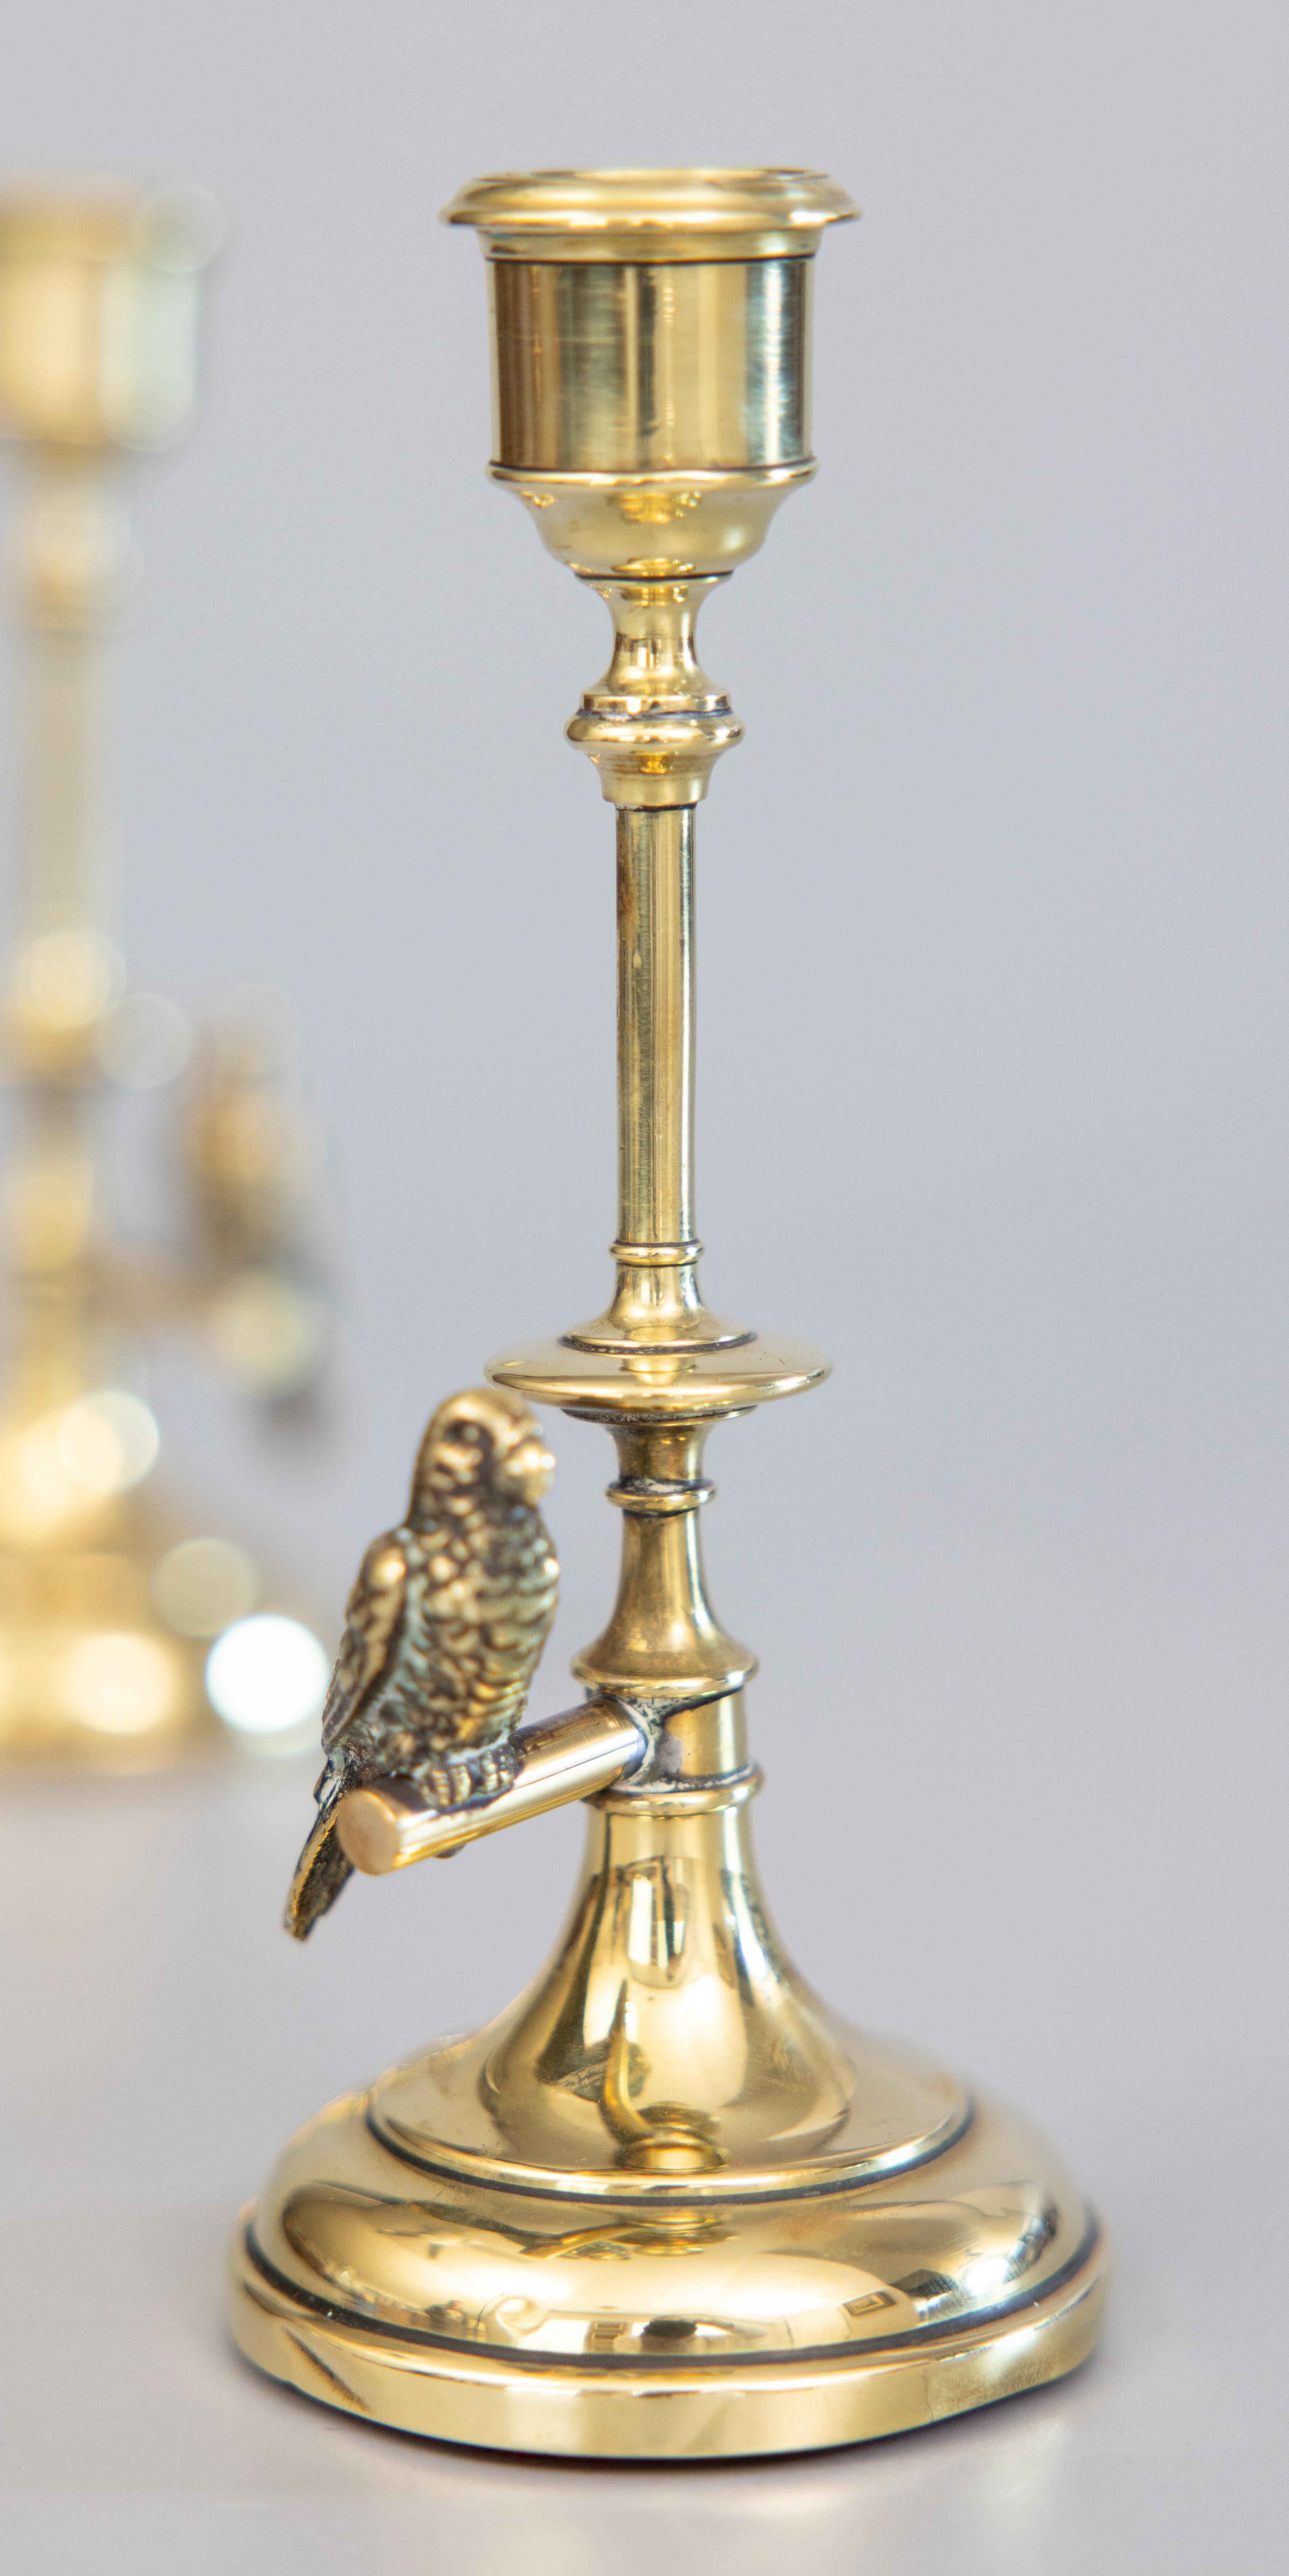 A fine pair of English Edwardian brass candlesticks with charming budgies, circa 1910. These handsome candlesticks are well made and have brass budgie parakeets on perches with wonderful details.